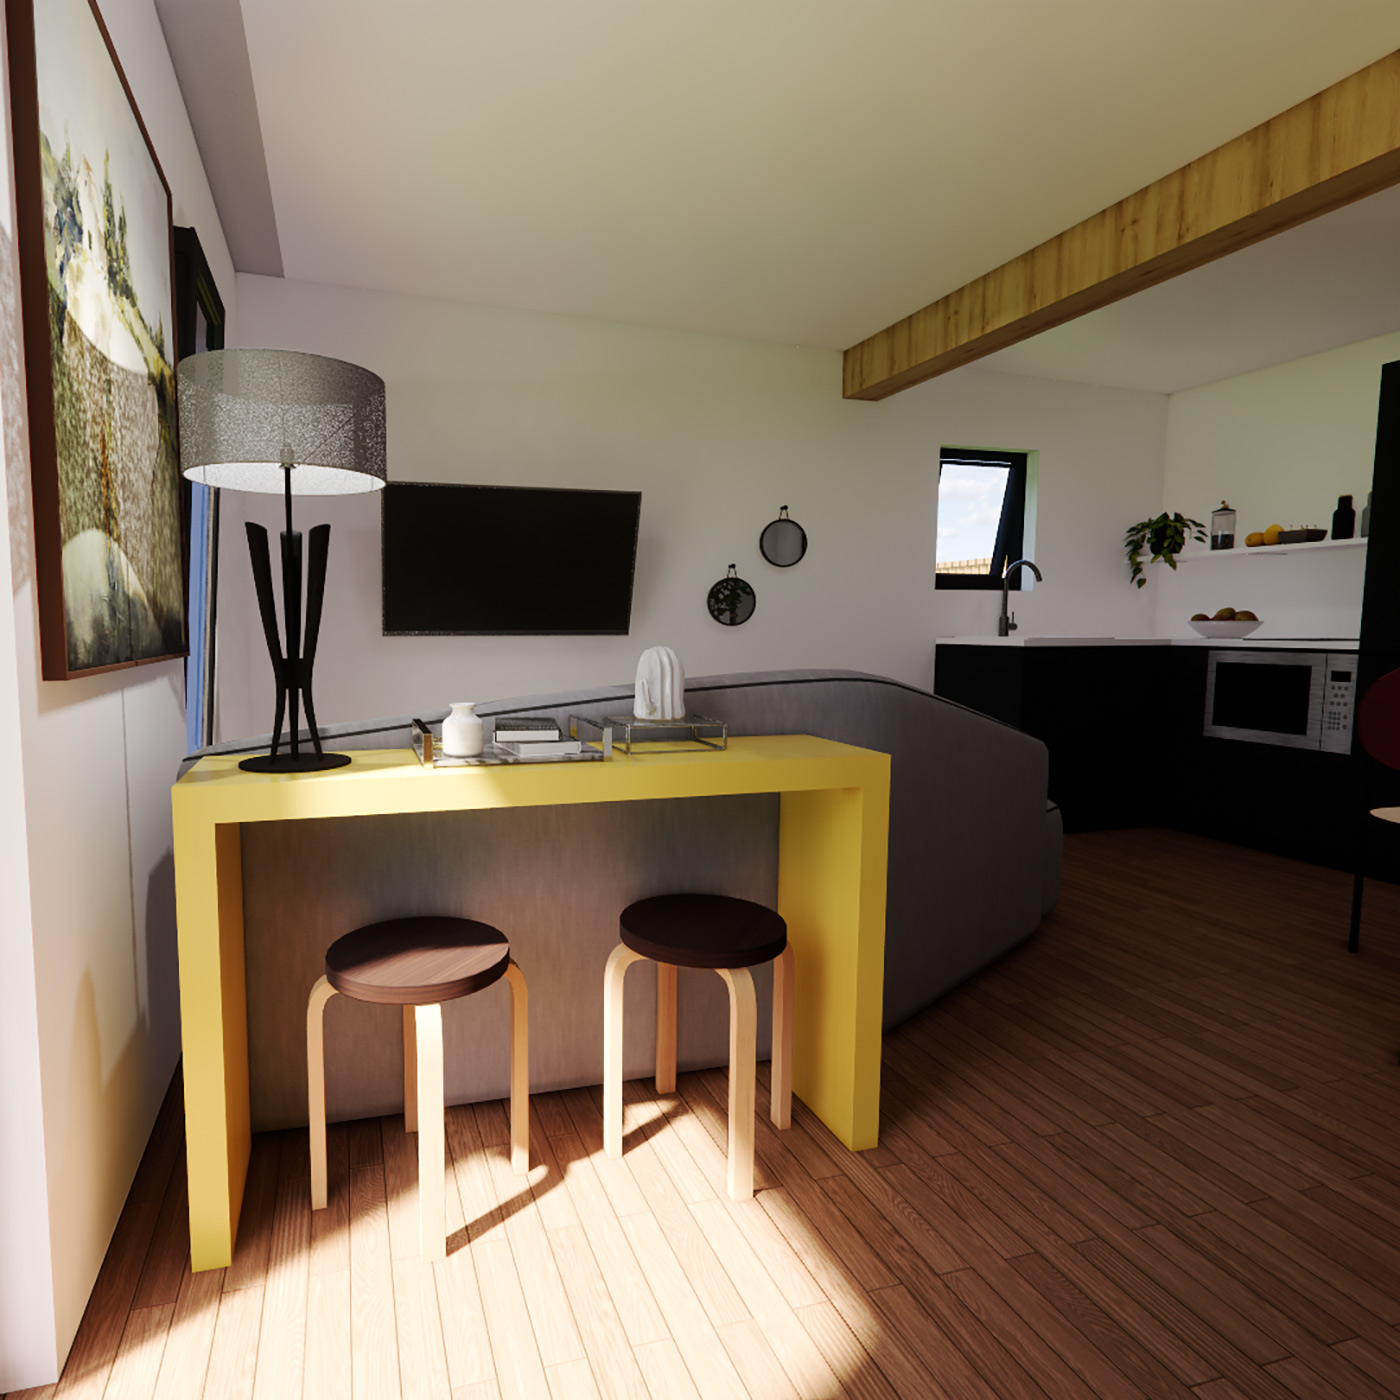 Interior visualisation of 5.0m by 7.4m mobile home